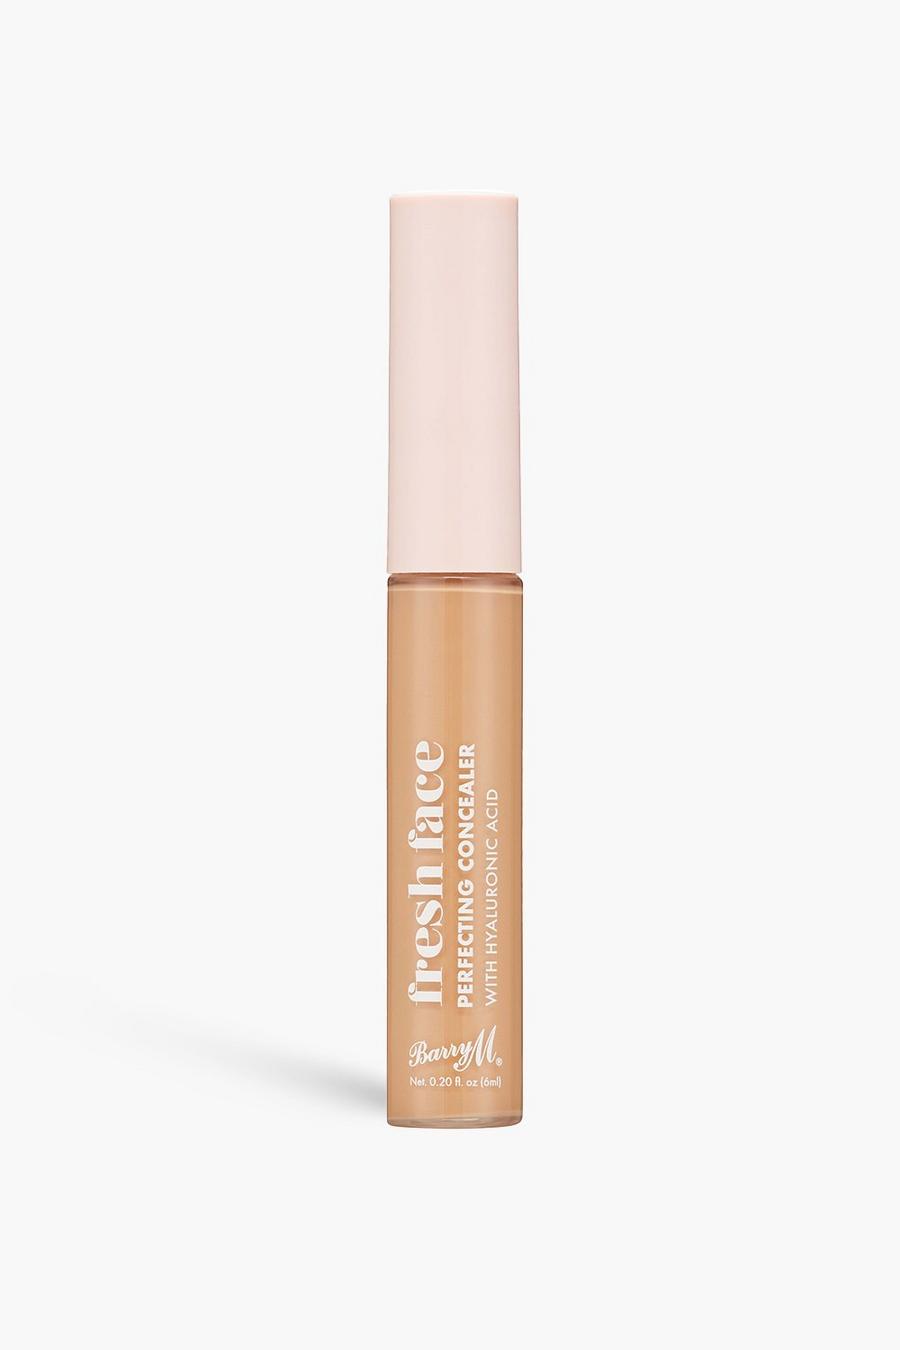 Tan marron Barry M Fresh Face Perfecting Concealer 6